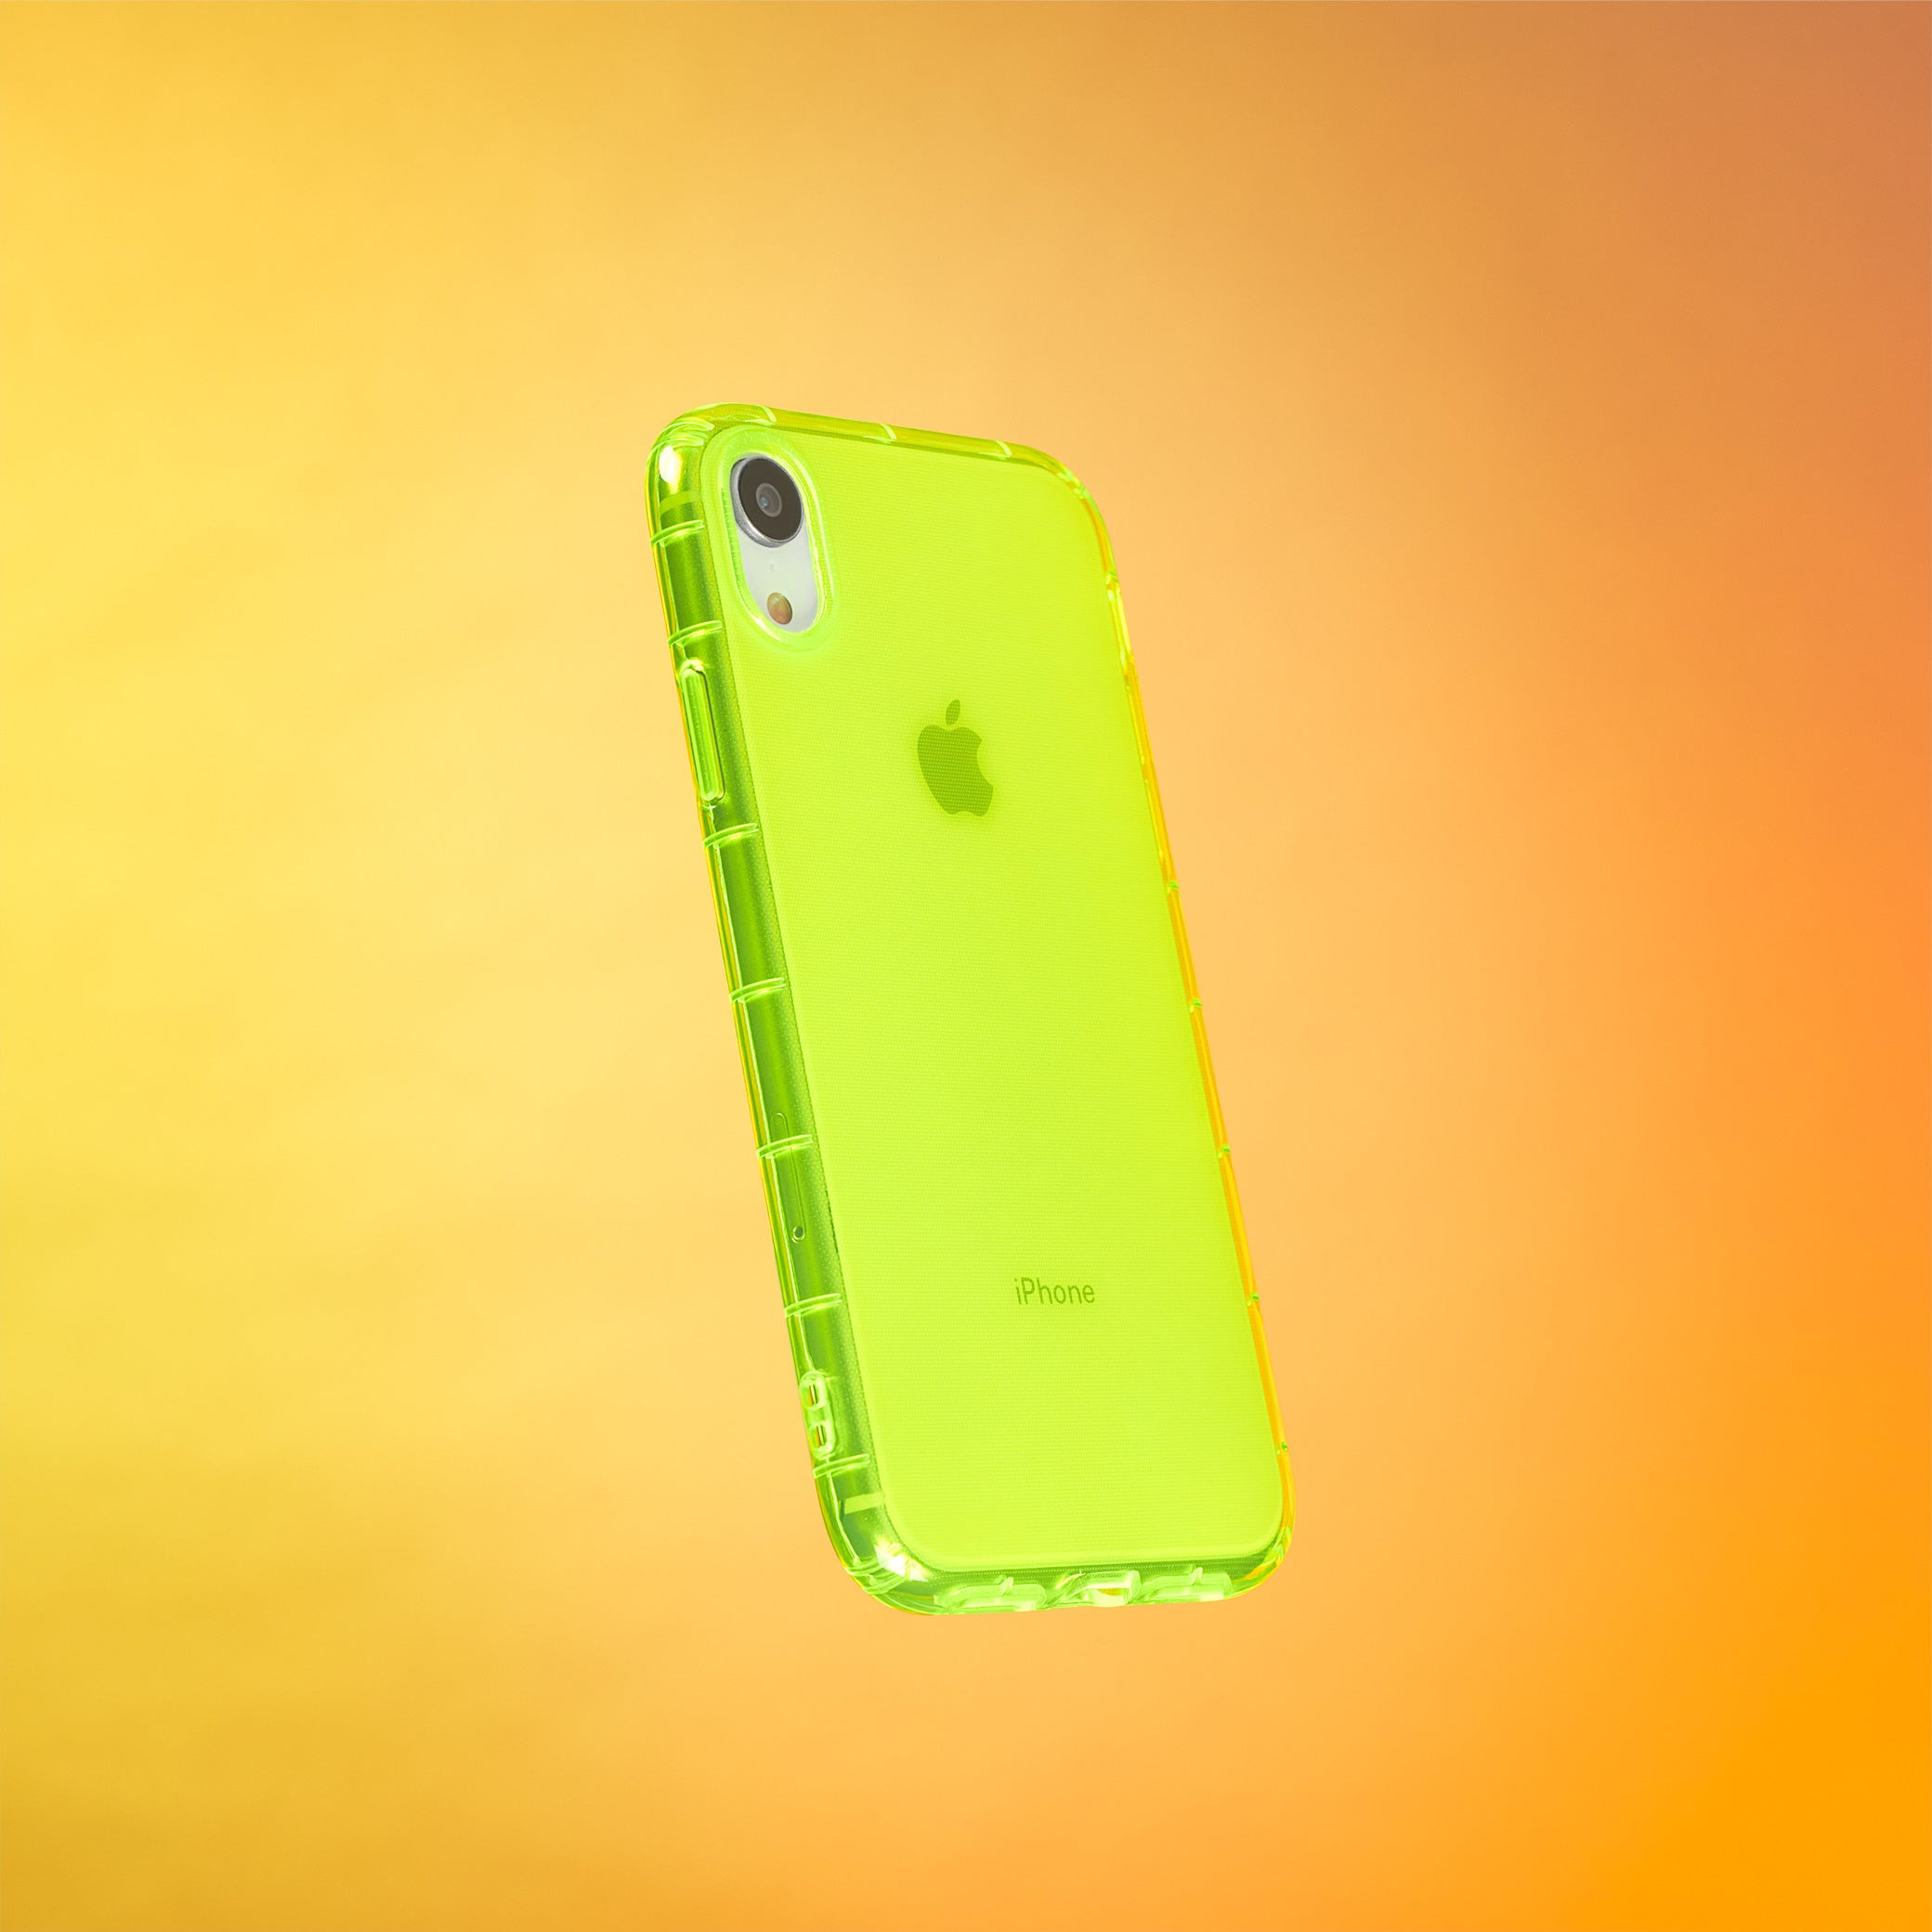 Highlighter Case for iPhone XR - Conspicuous Neon Yellow